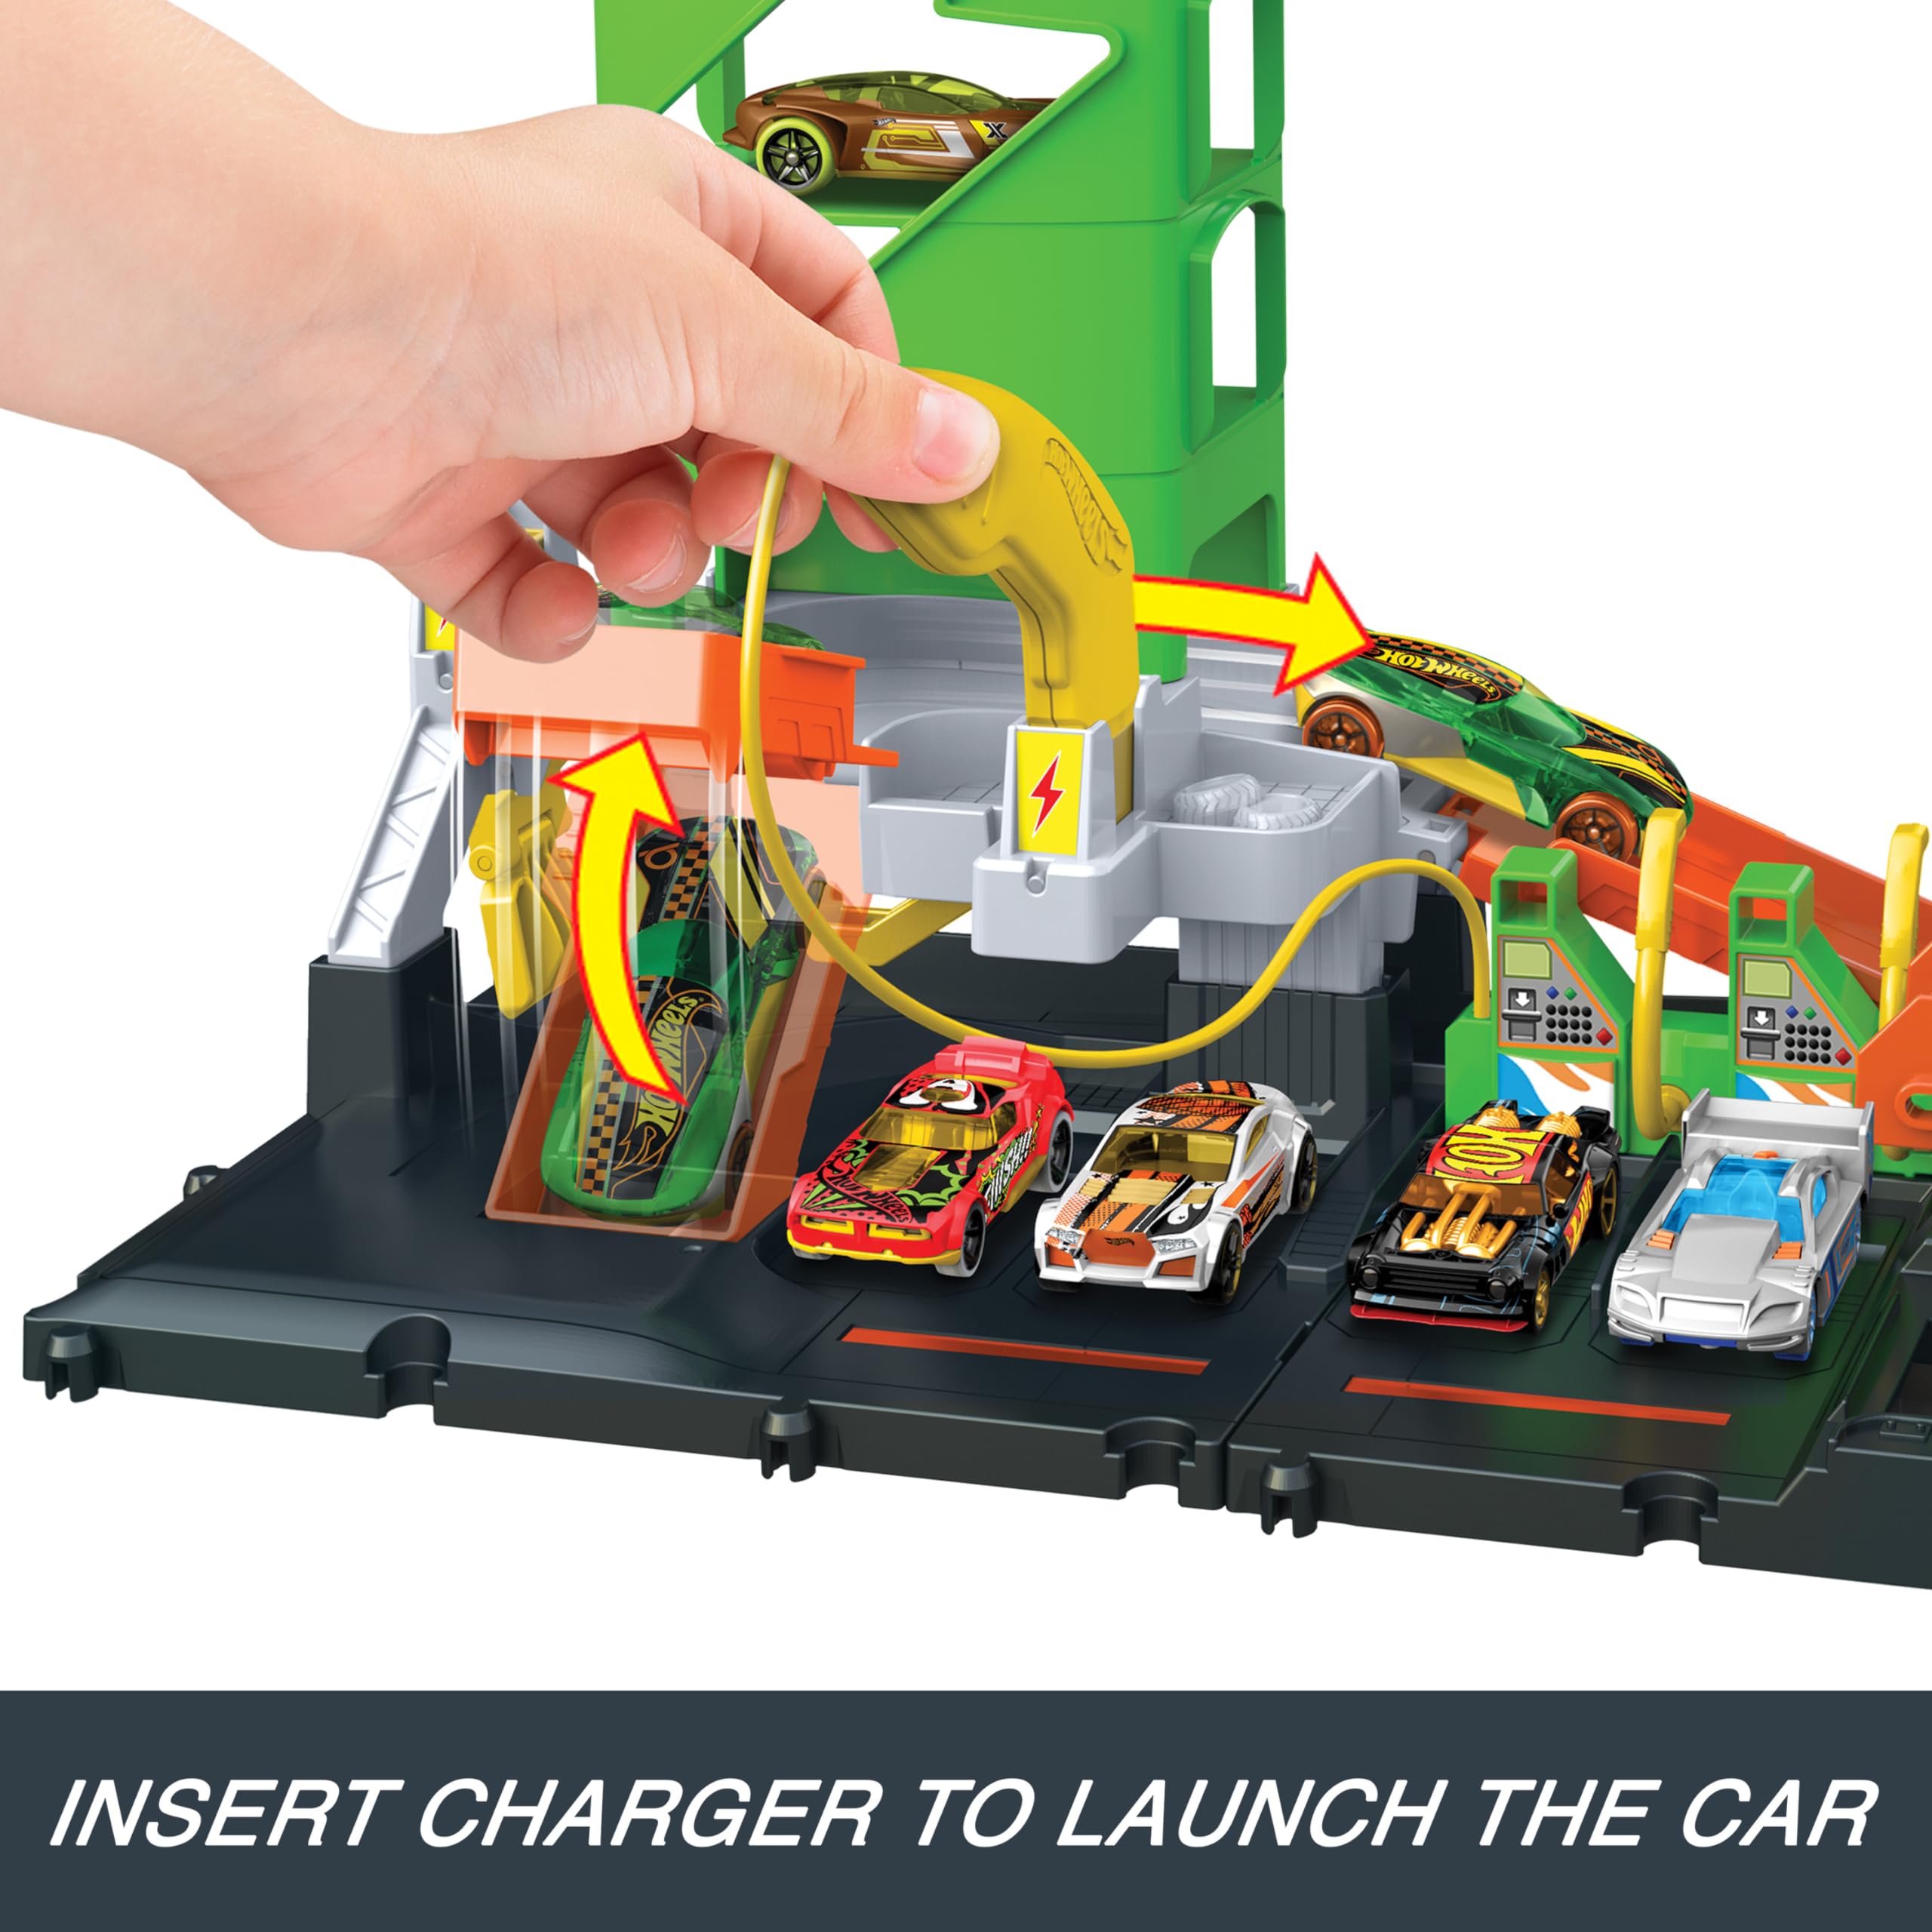 Hot Wheels Toy Car Track Set, Super Recharge Fuel Station Playset with Pretend EV Chargers & 1:64 Scale Toy Car